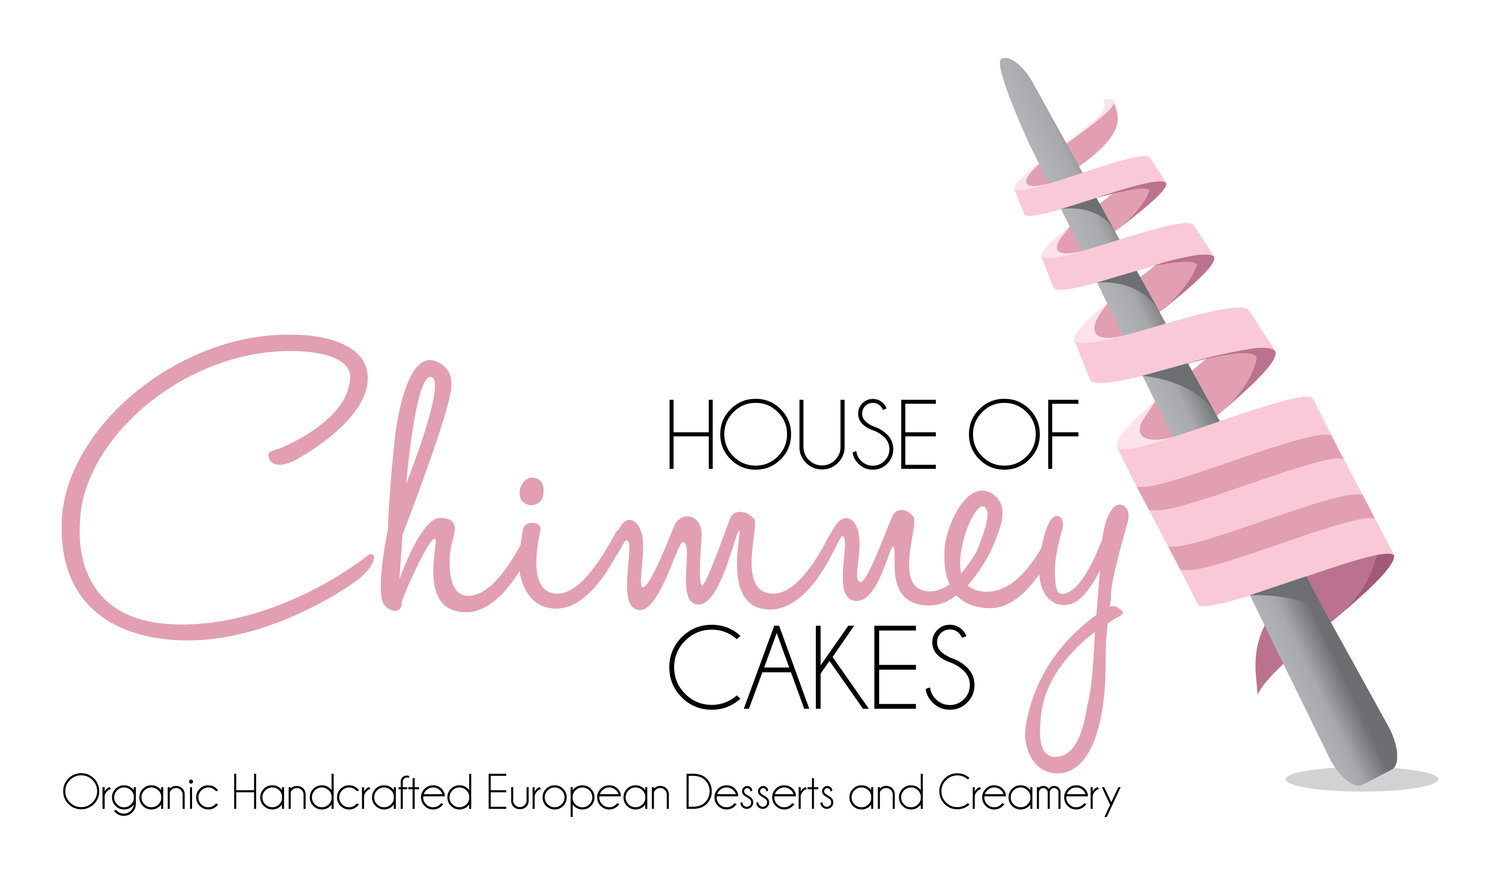 House of Chimney Cakes